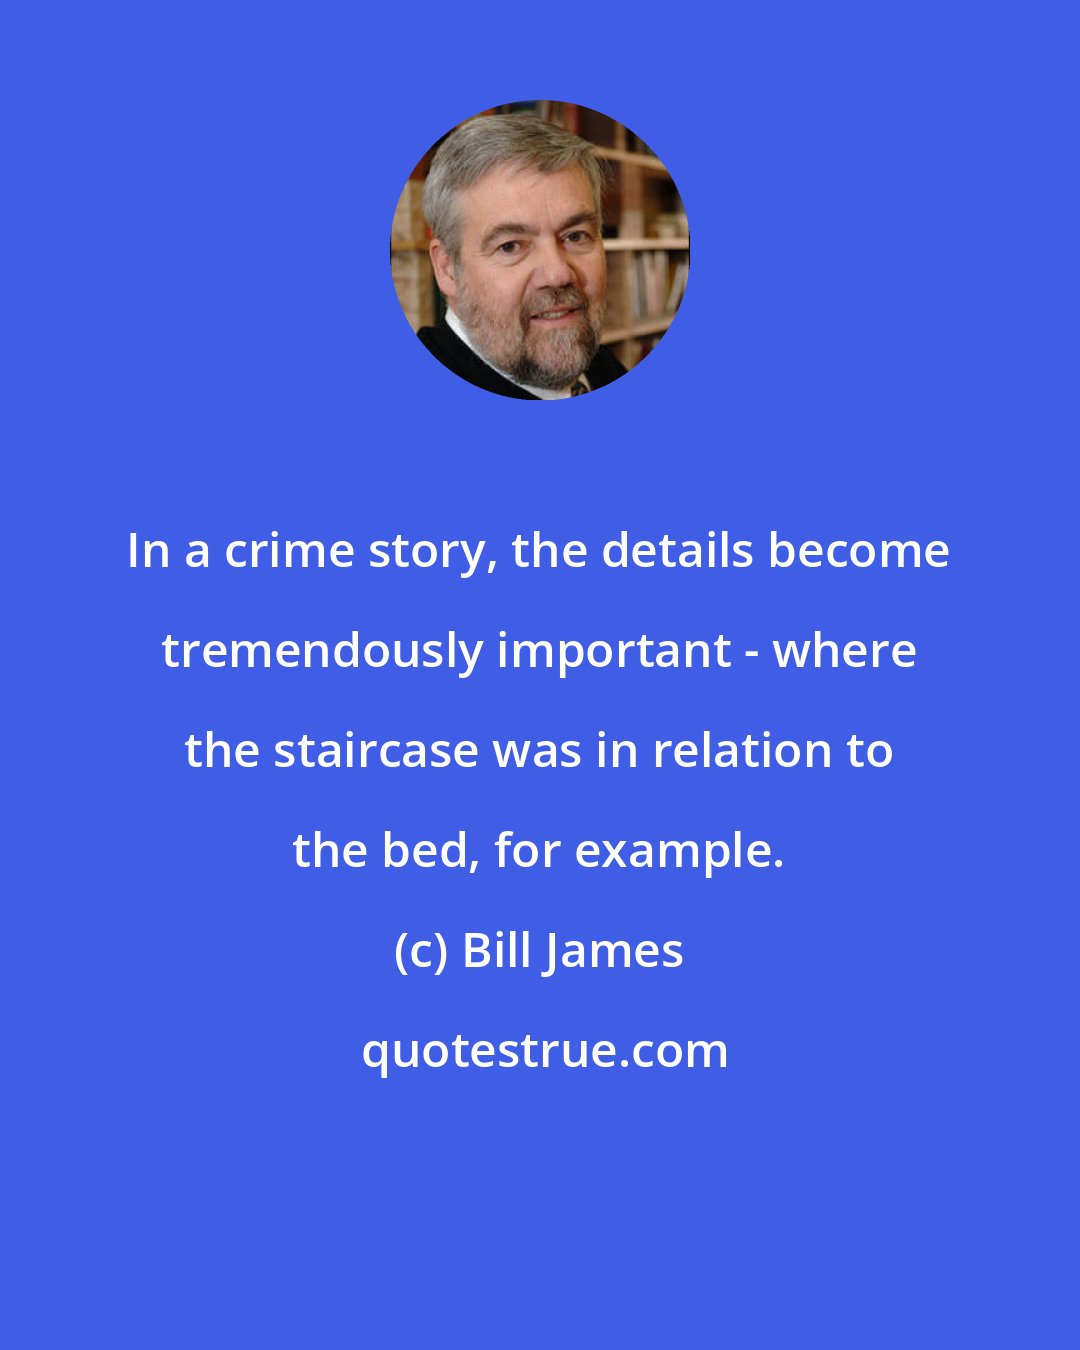 Bill James: In a crime story, the details become tremendously important - where the staircase was in relation to the bed, for example.